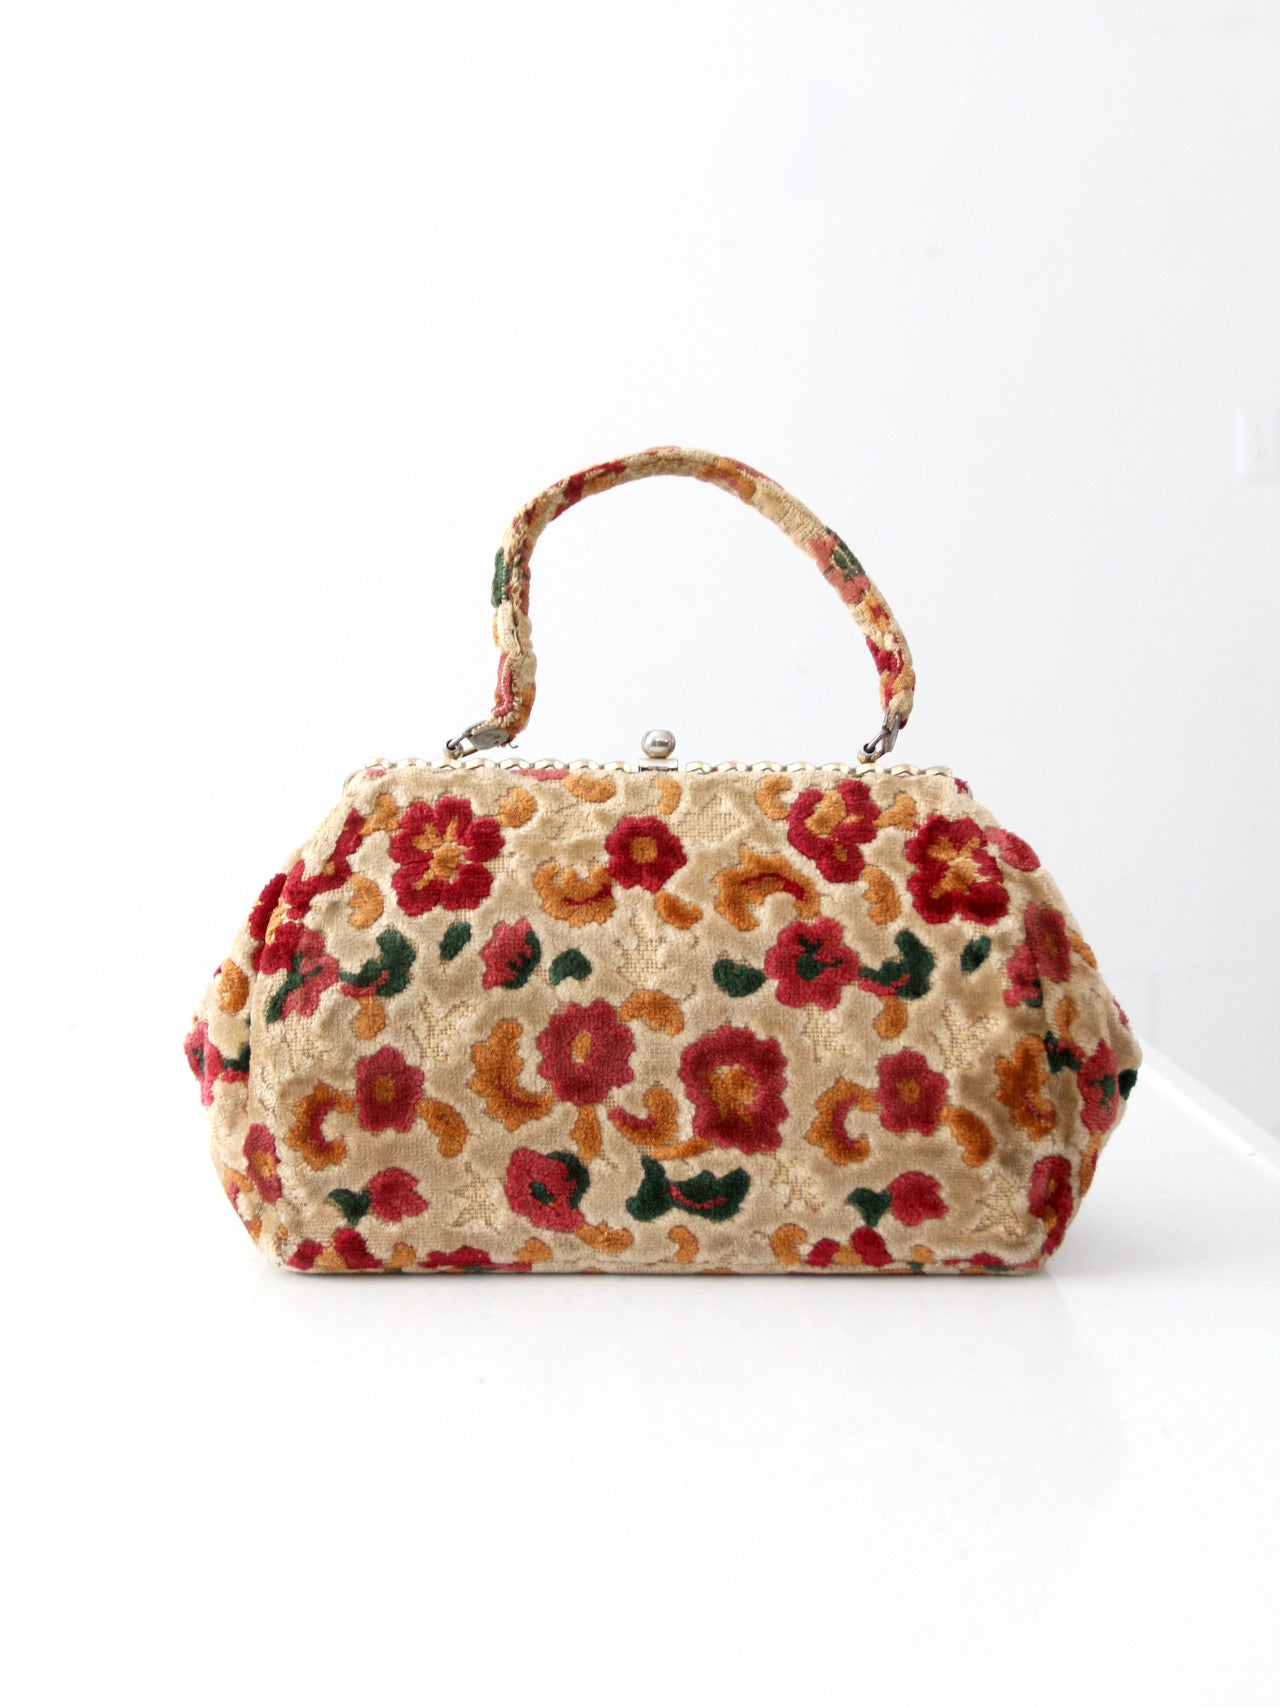 1960s Purse Floral Tapestry Needlepoint Hand Bag - Etsy